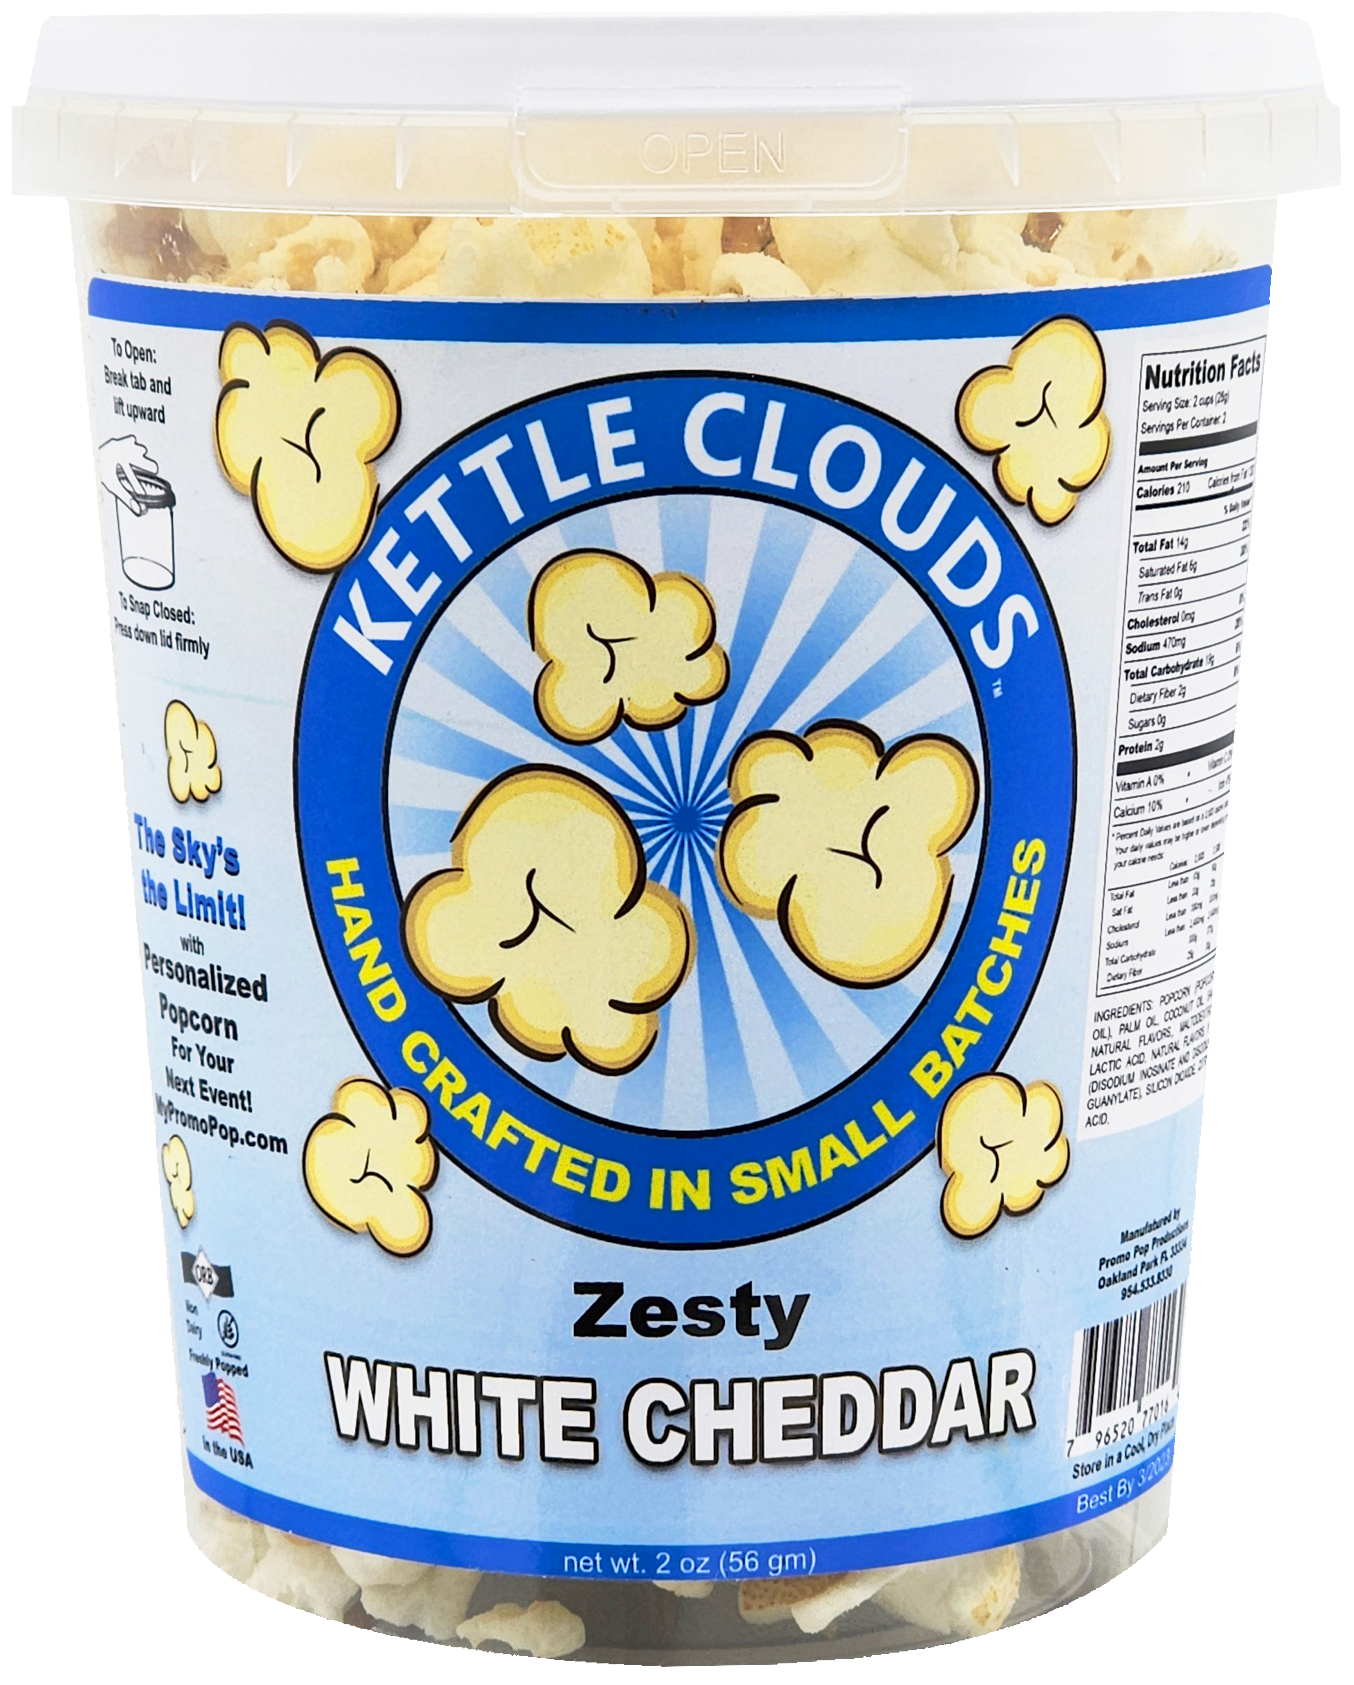 Kettle Clouds™ - White Cheddar Classic (as low as $4.49 per bucket) Case of 12 Price